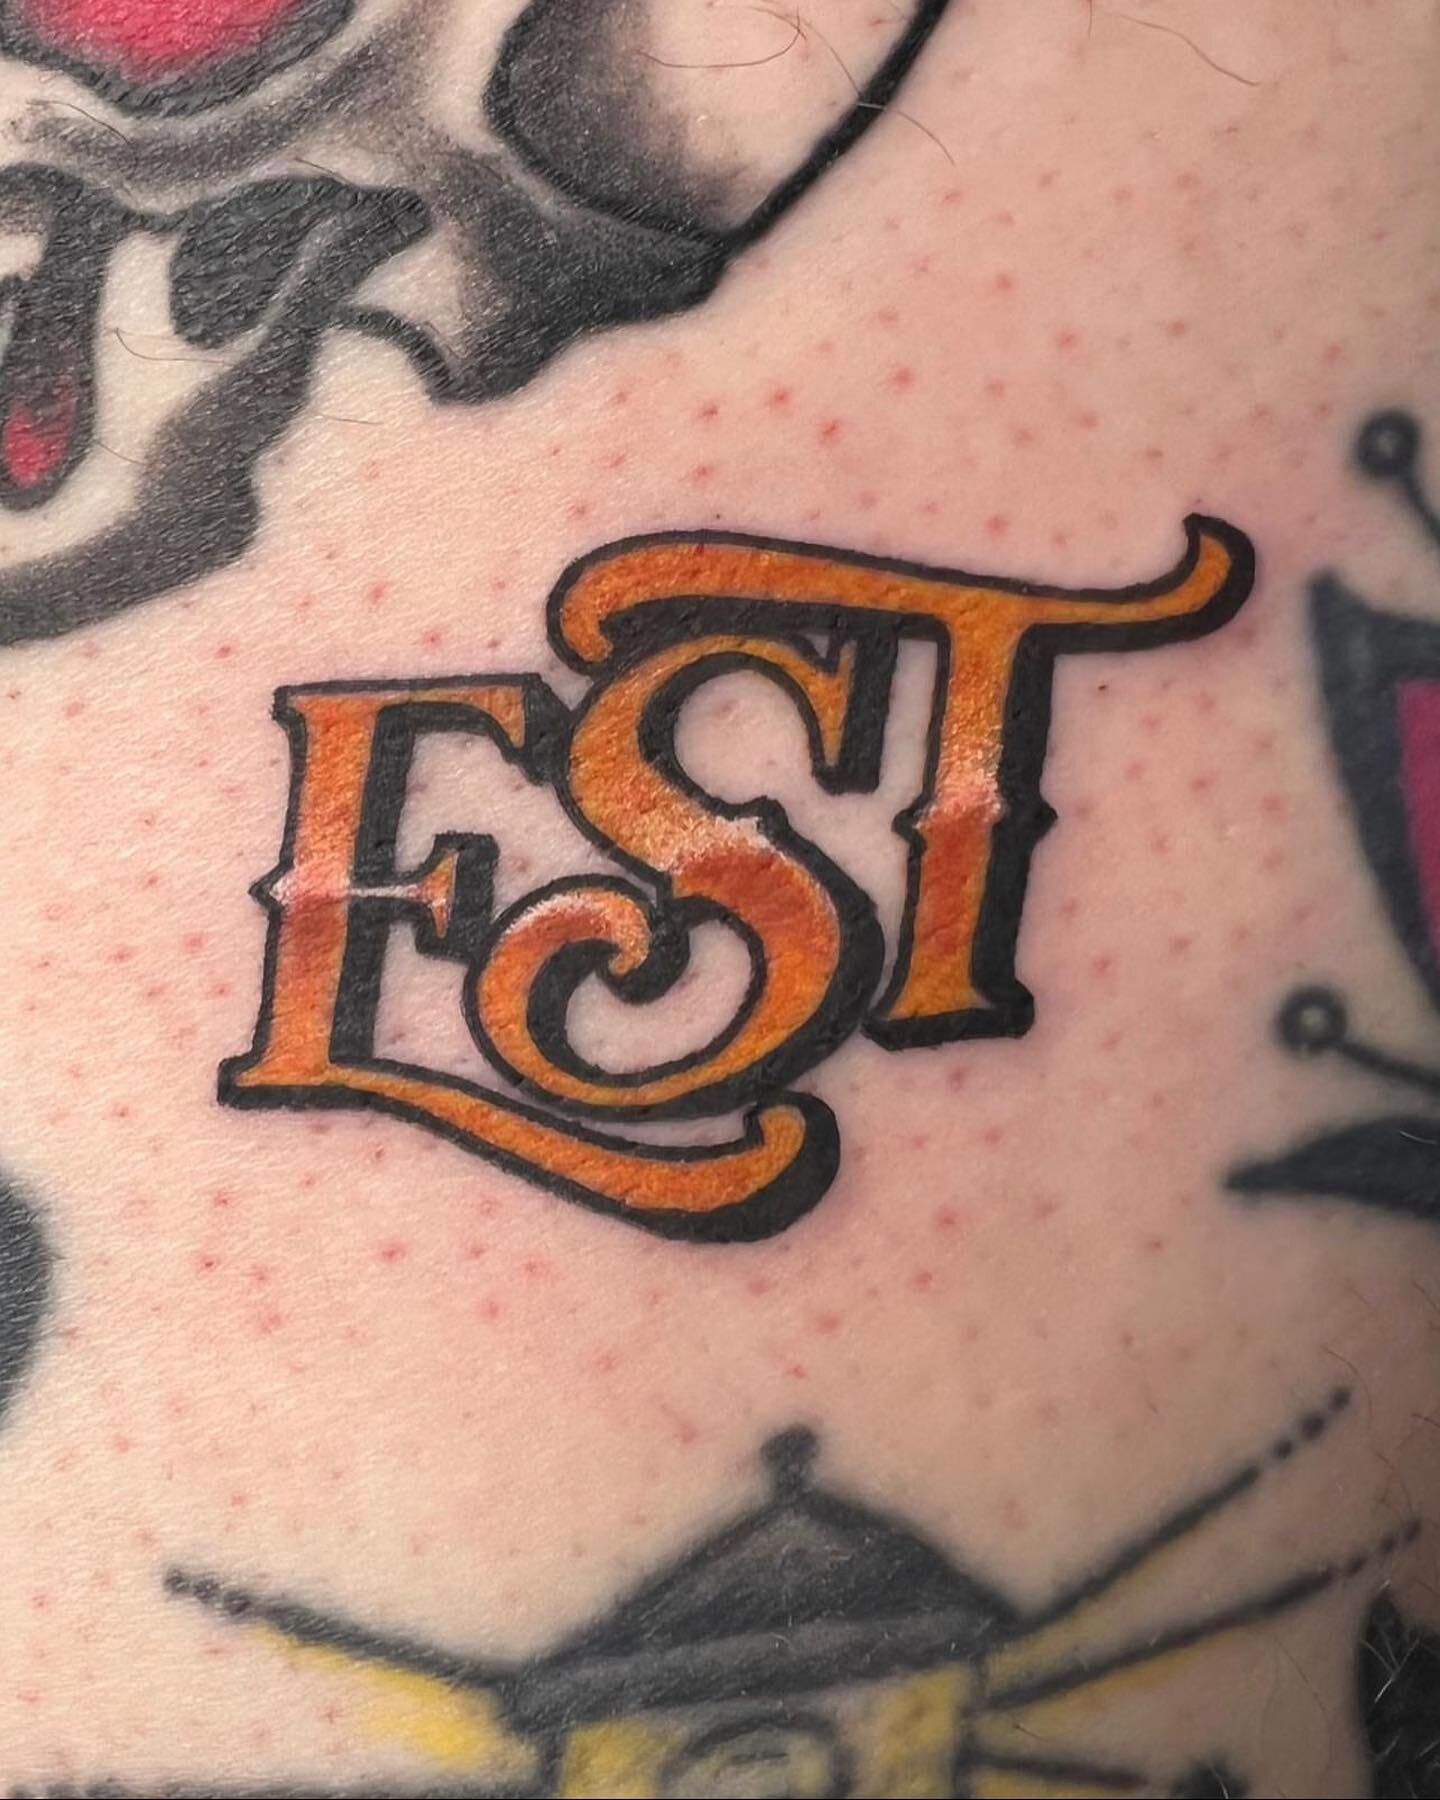 It&rsquo;s always easy over at Easy Street! 
EST logo done on @dustintatperson by @robmotherfuckinjohnson 
Walk-ins welcome!